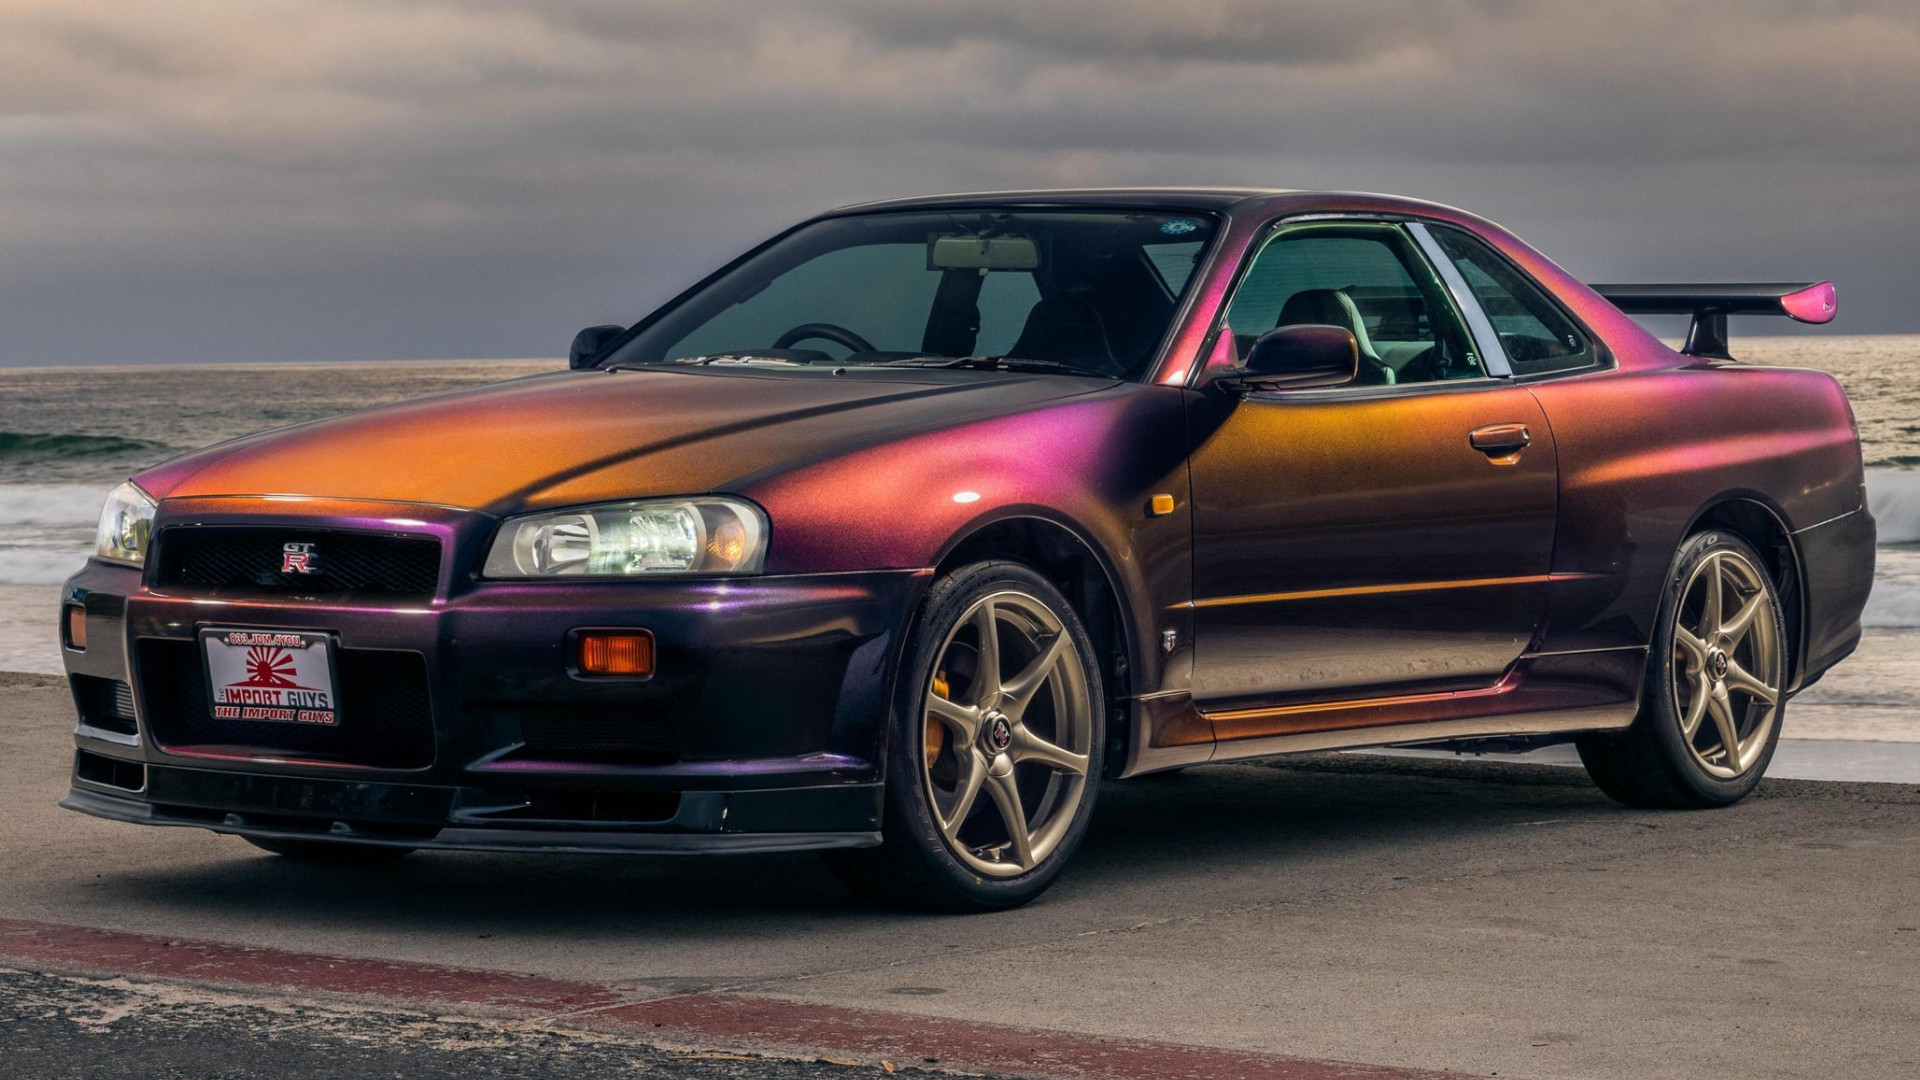 You Can Own an Iconic R34 Nissan Skyline GT-R V-Spec in the US, But It’ll Cost Ya